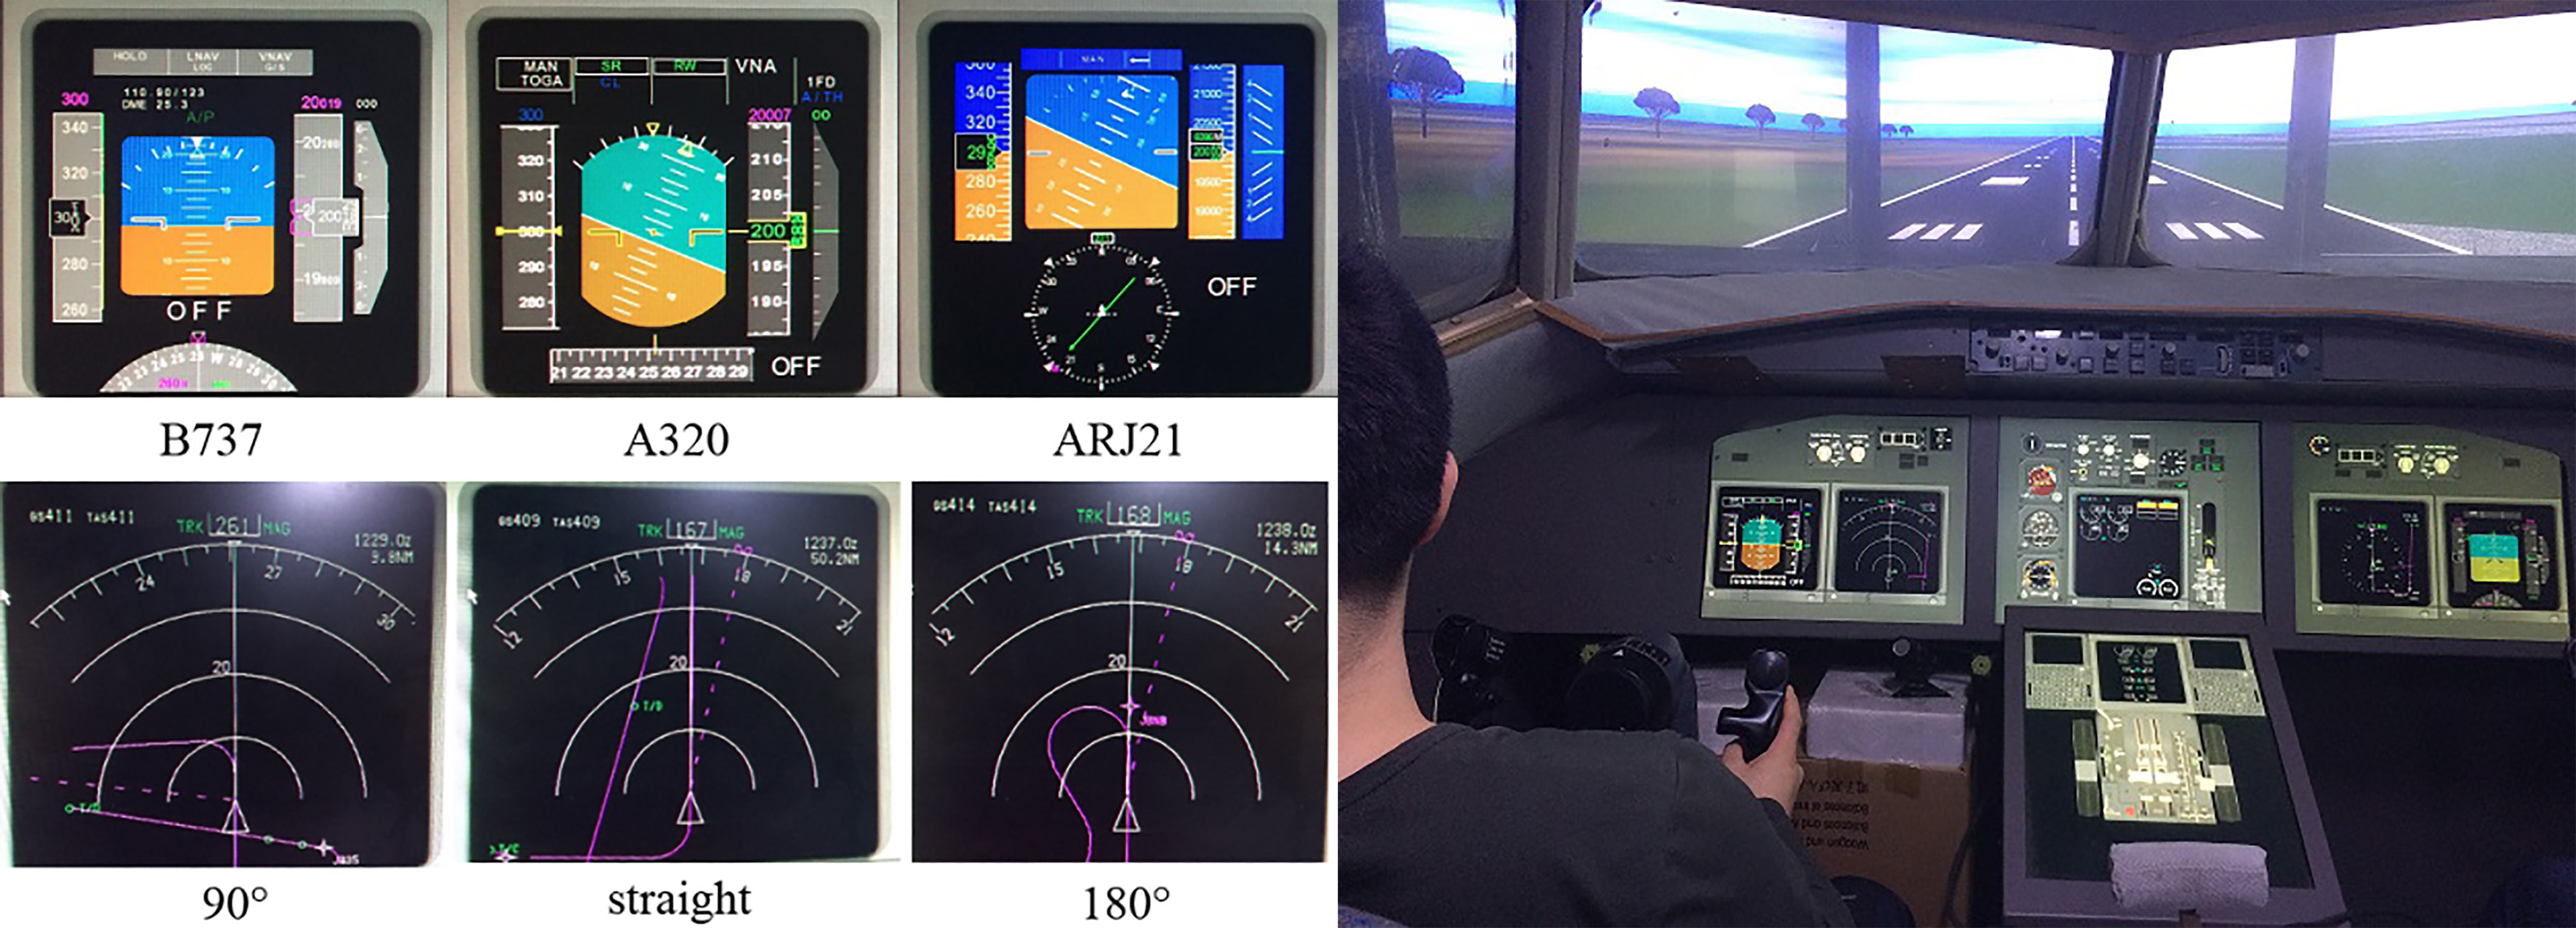 Simulated interface of B737, A320, and ARJ21, cruising flight phase (left) and simulation (right).